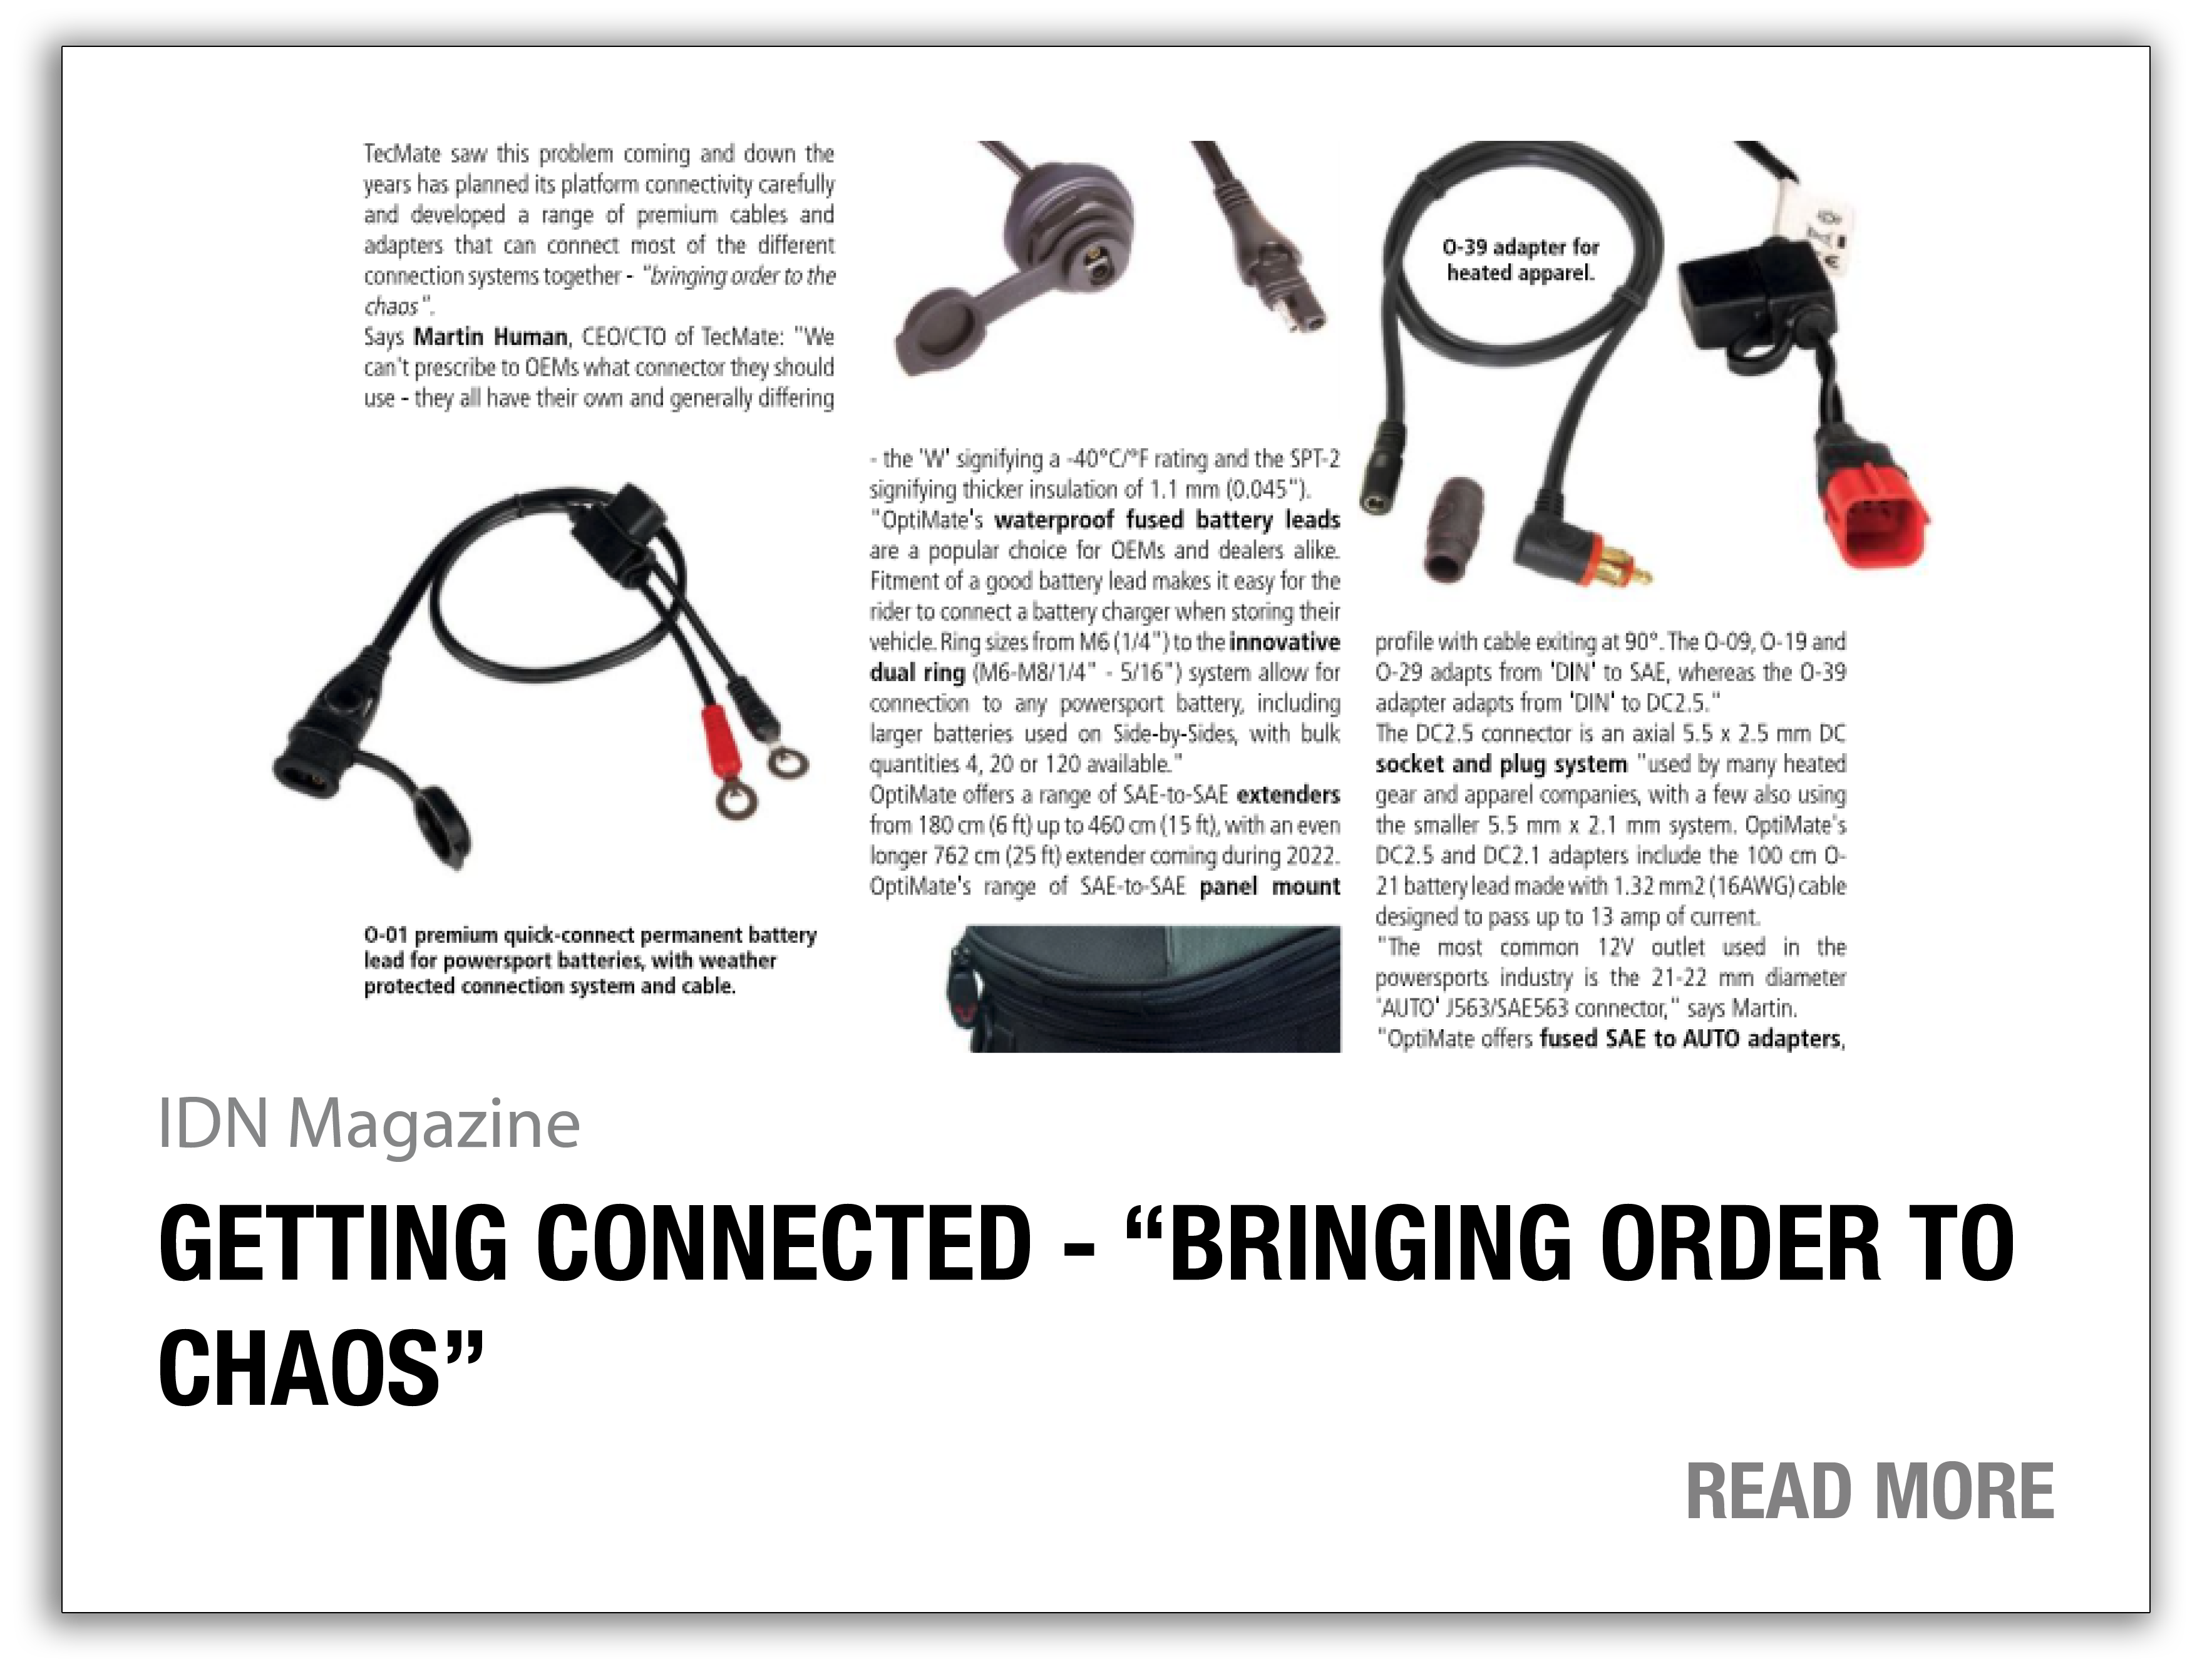 article thumbnail: getting connected - "bringing order to chaos" (IDN Magazine)